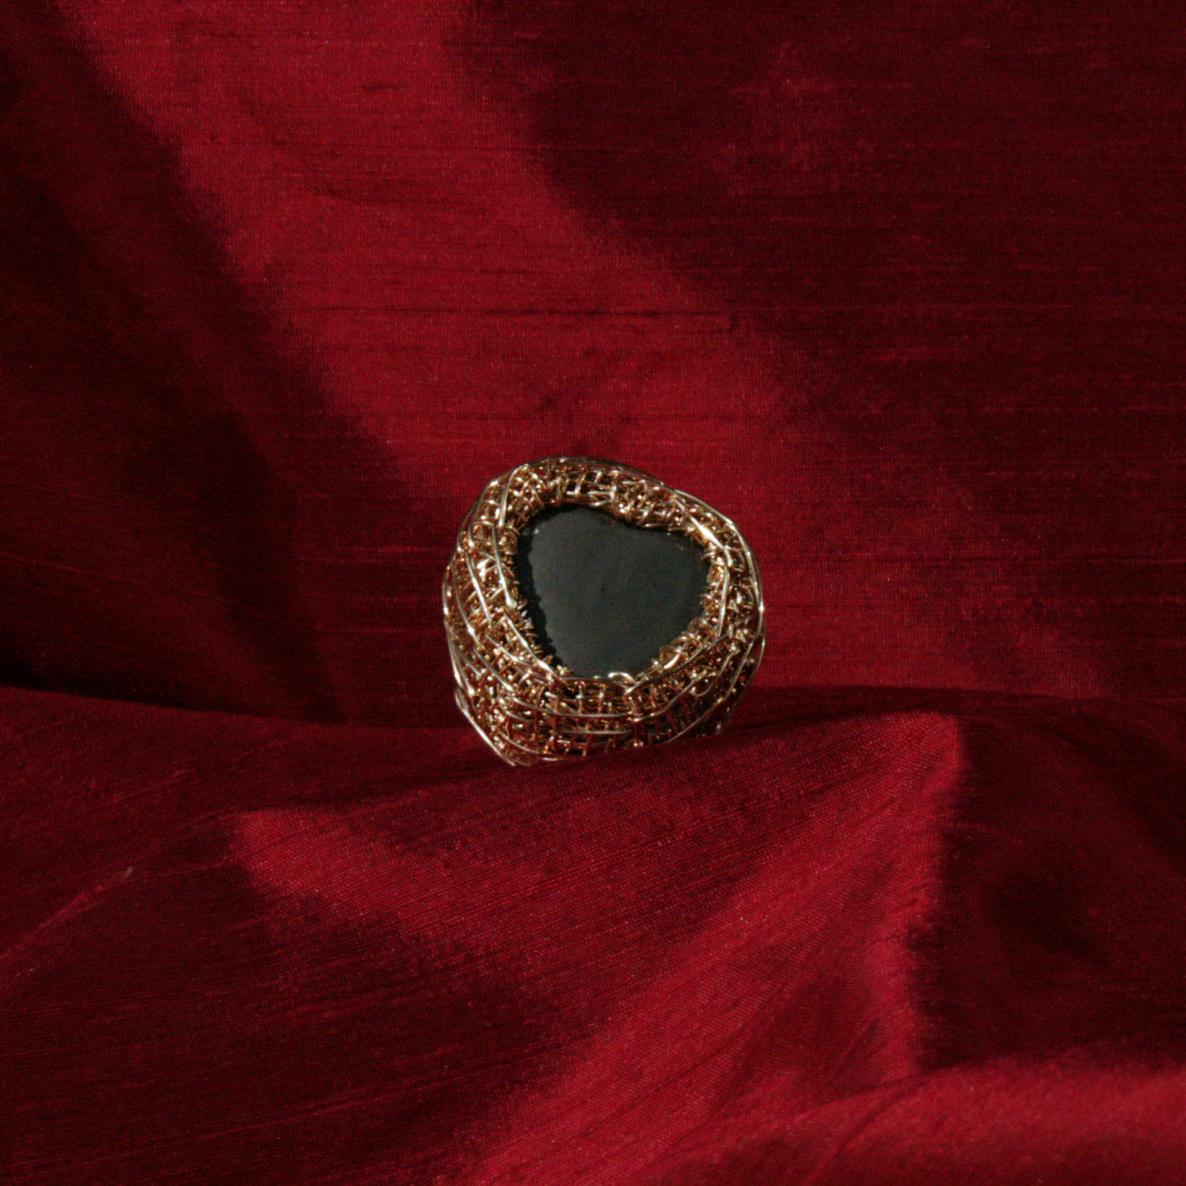 Heart Shaped Grey Stone Statement Cocktail Ring in 14 K Gold F. by the Artist For Sale 2